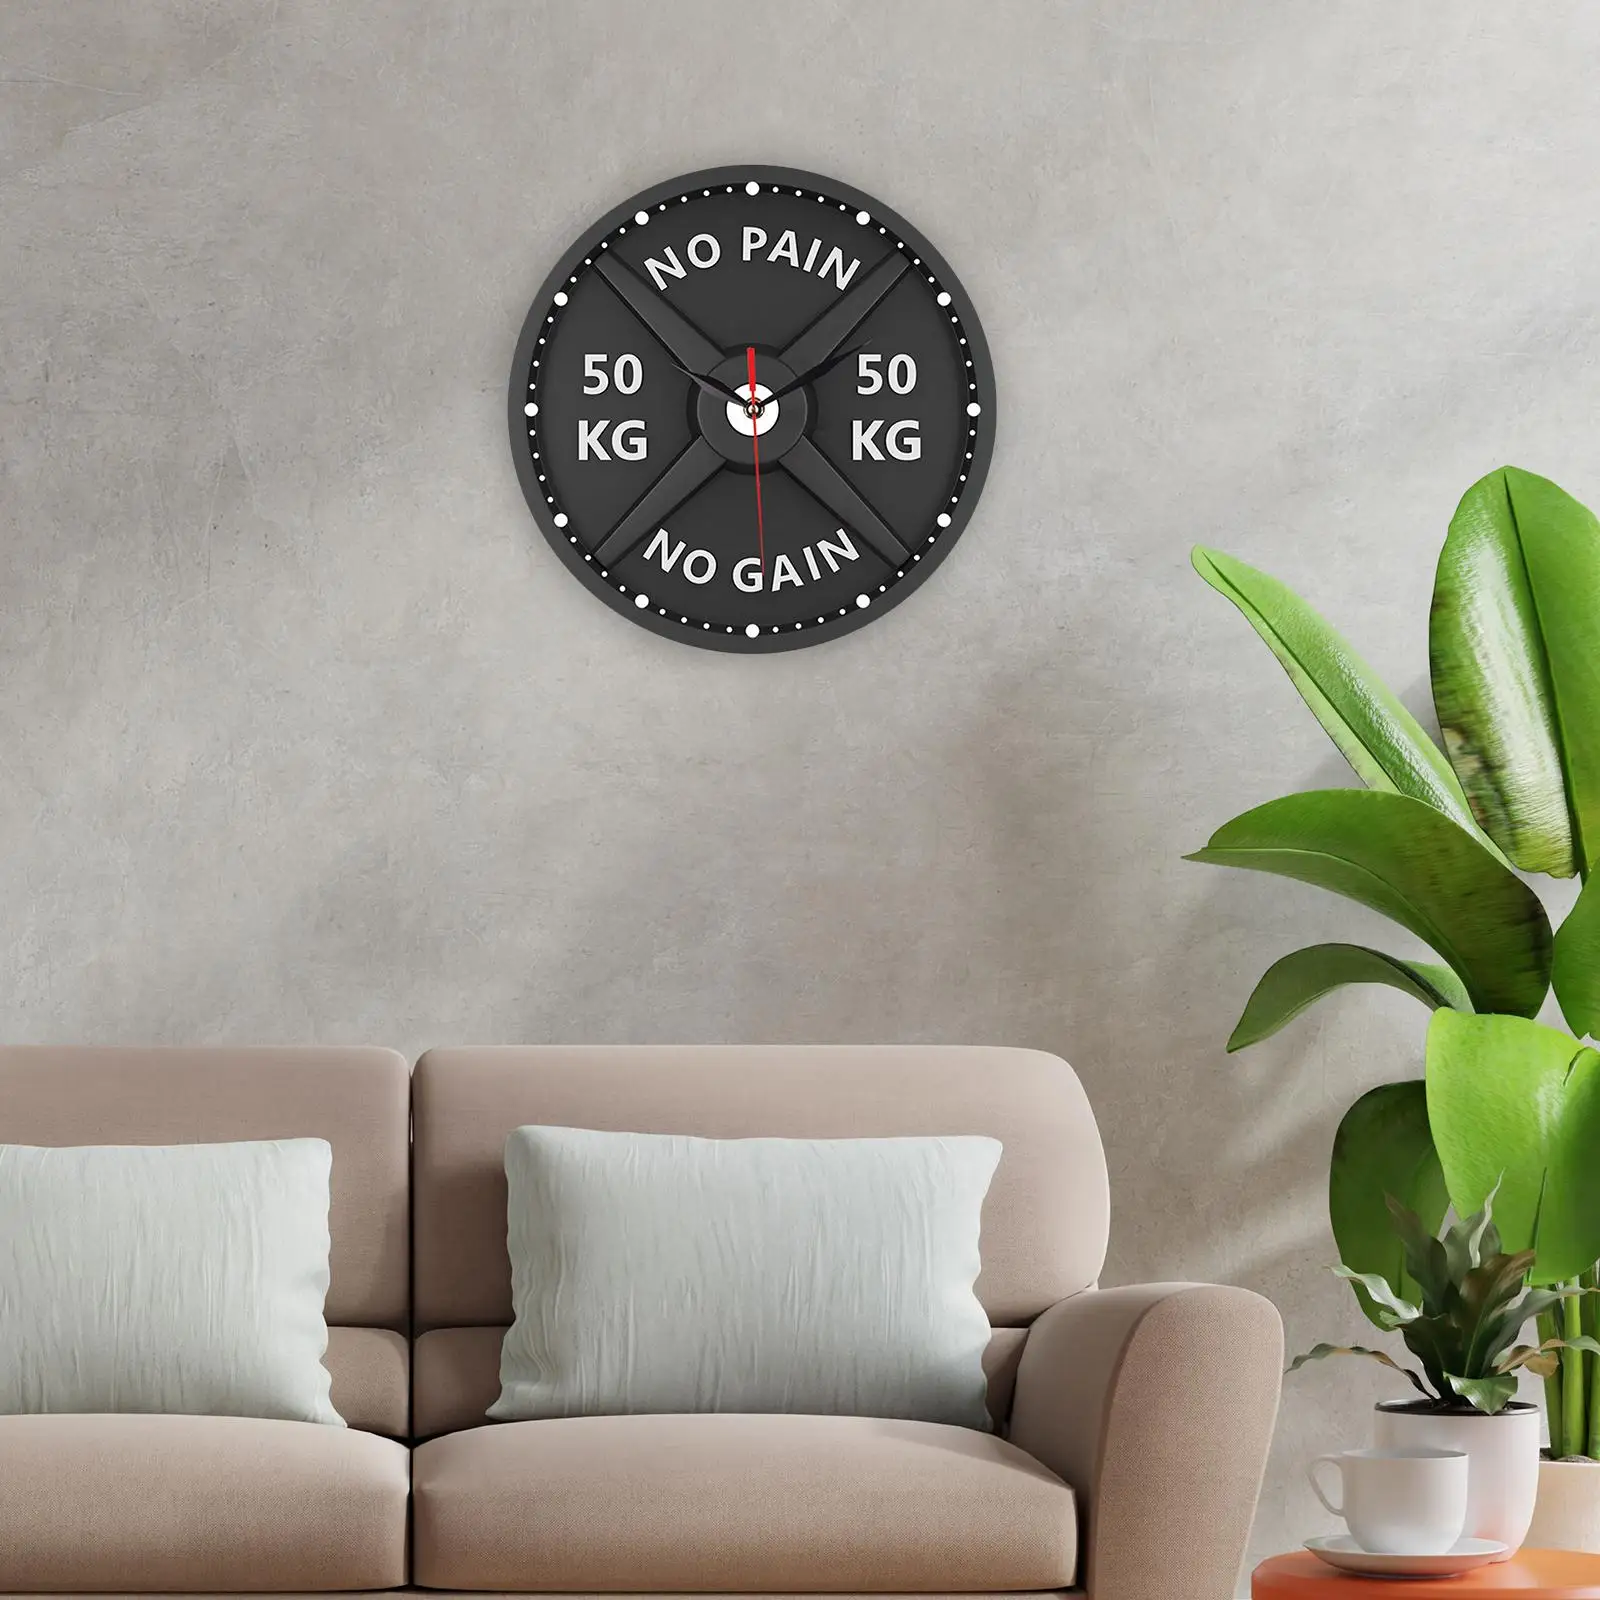 3D Wall Clock Gift Decorative 12inch Stylish Silent Decorative Clock for Home Gym Weight Lifting Workout Bodybuilding Decoration